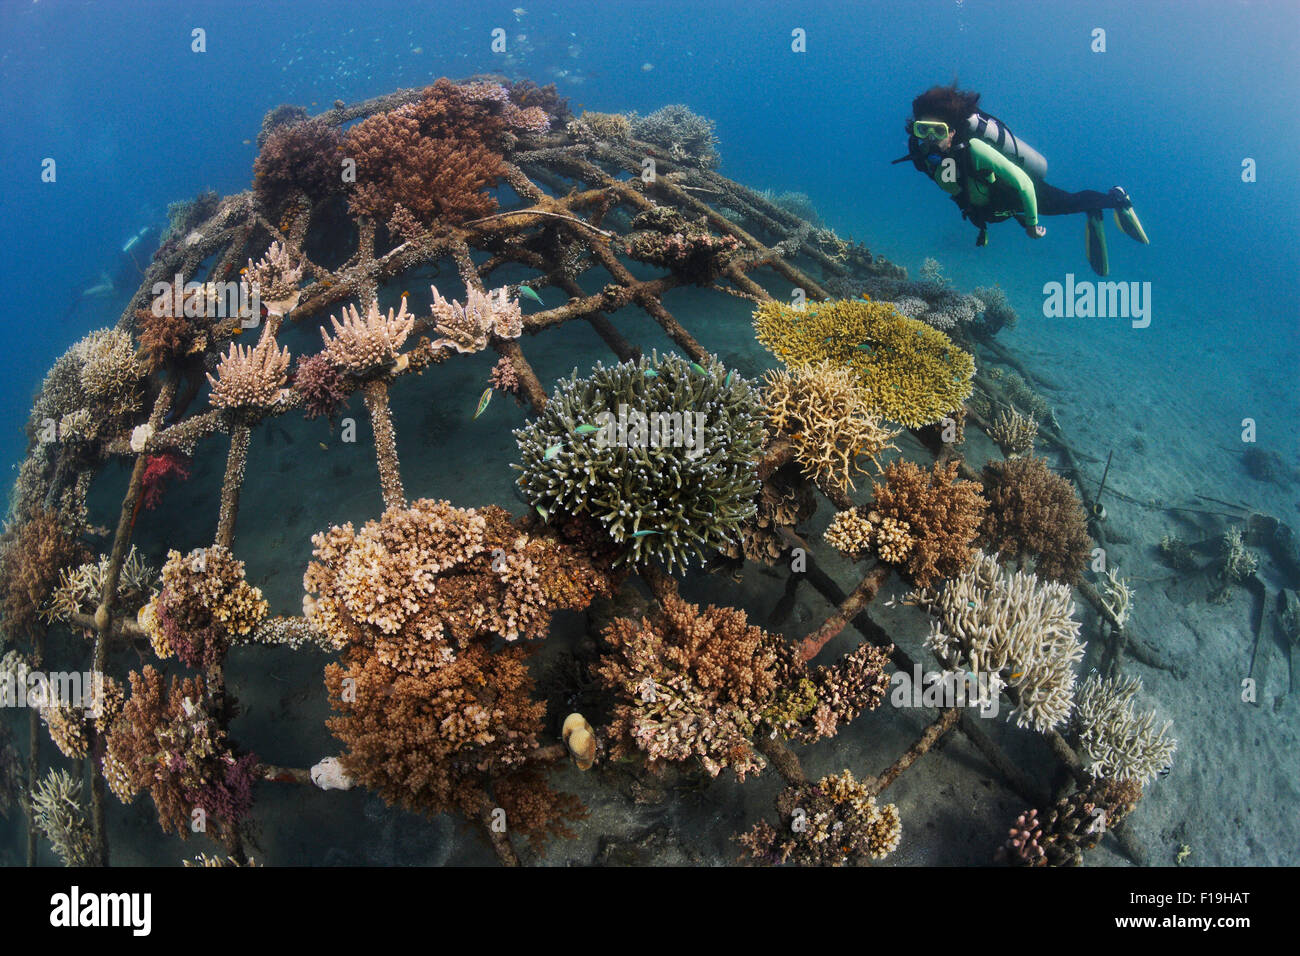 https://c8.alamy.com/comp/F19HAT/px1299-d-an-artificial-reef-in-permuteran-bay-on-the-island-of-bali-F19HAT.jpg